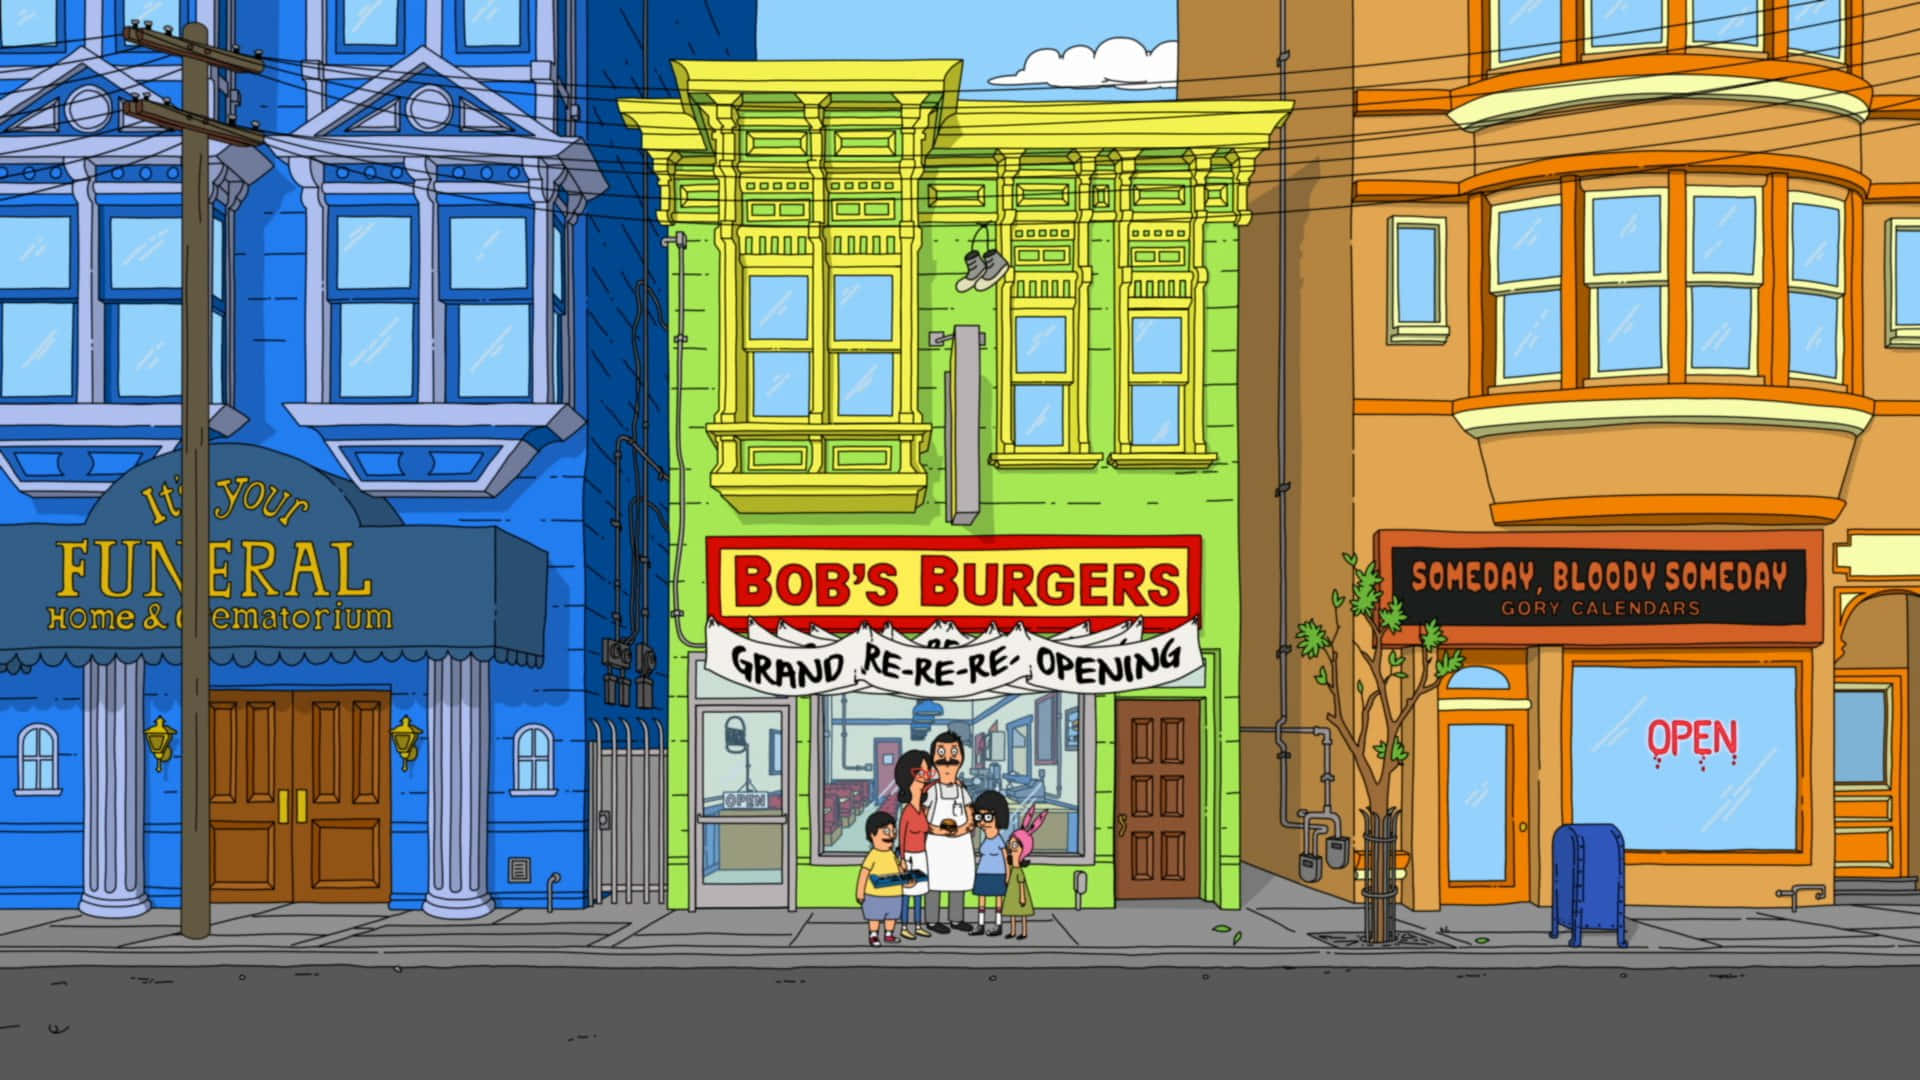 Bob's Burgers Grand Re-re-re-opening Background